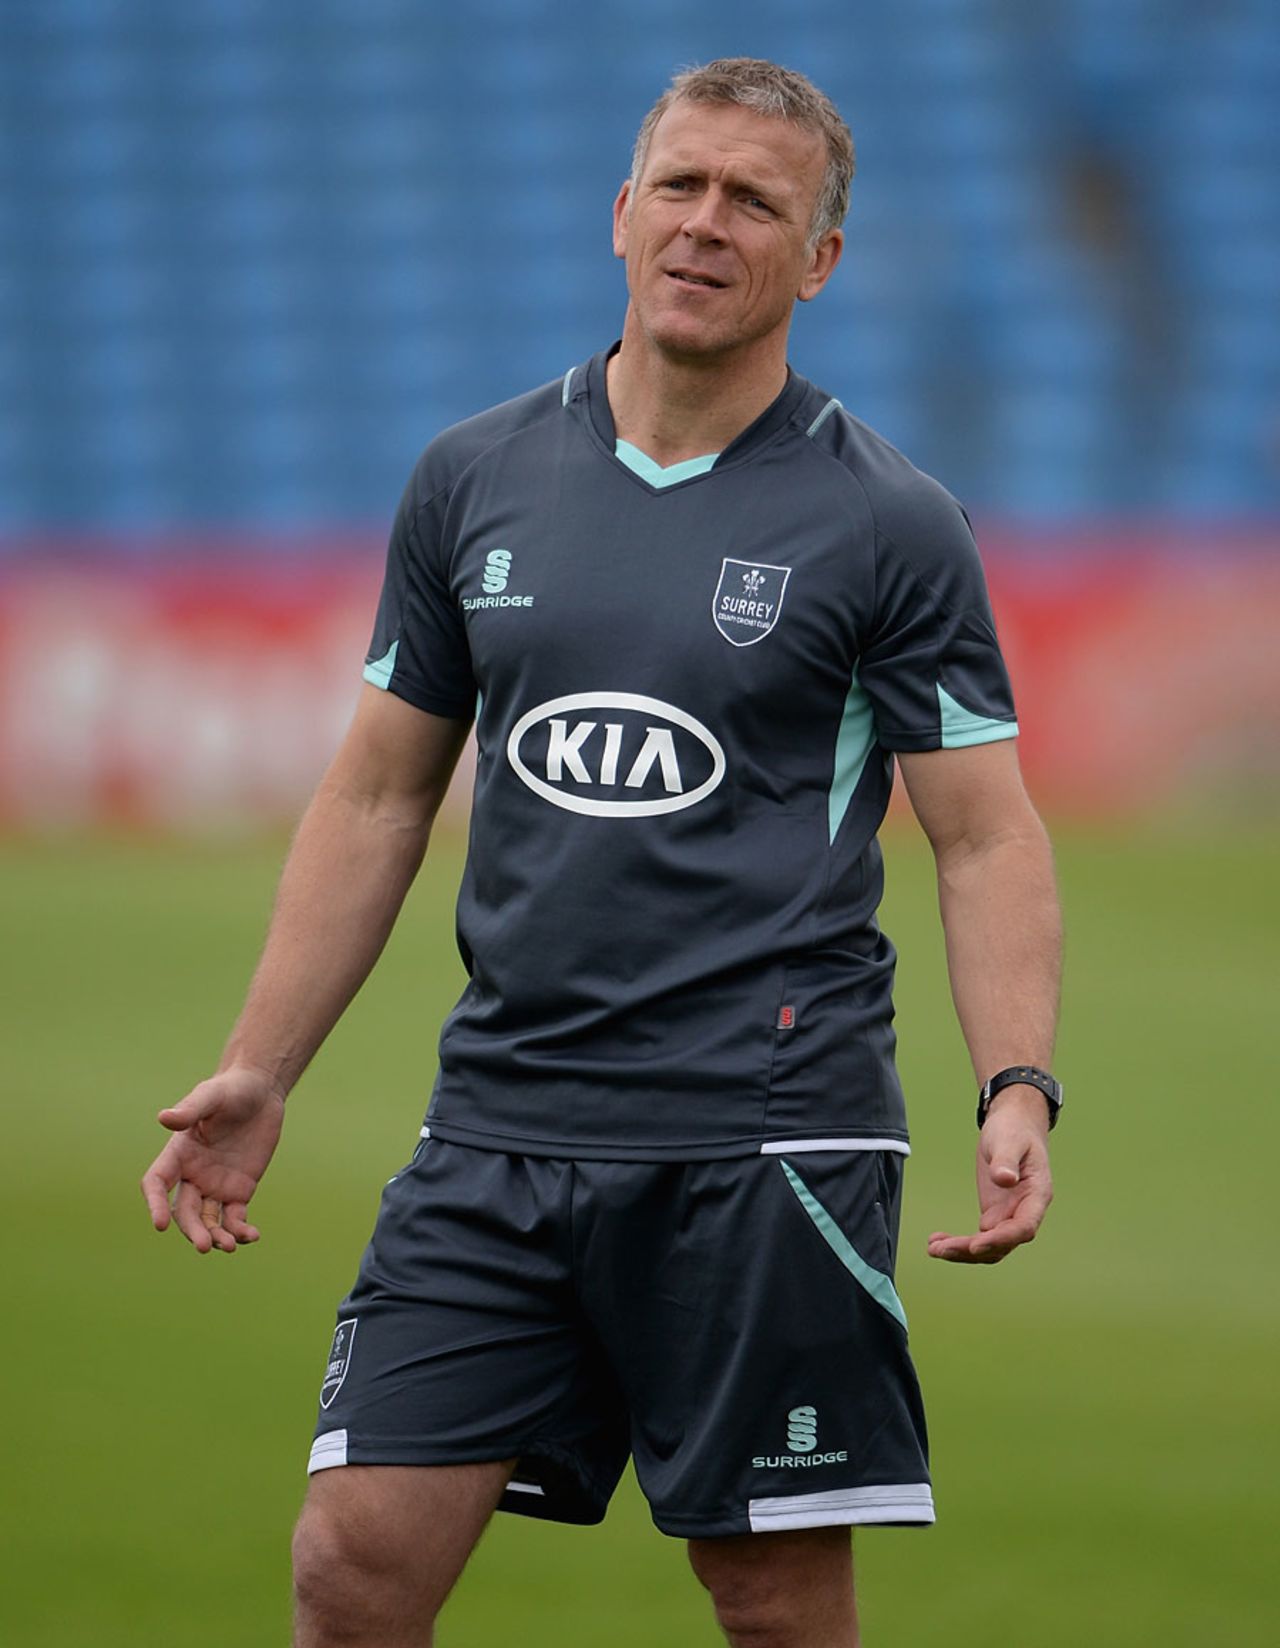 Alec Stewart takes charge of Surrey, Yorkshire v Surrey, County Championship, Division One, Headingley, 1st day, June 21, 2013